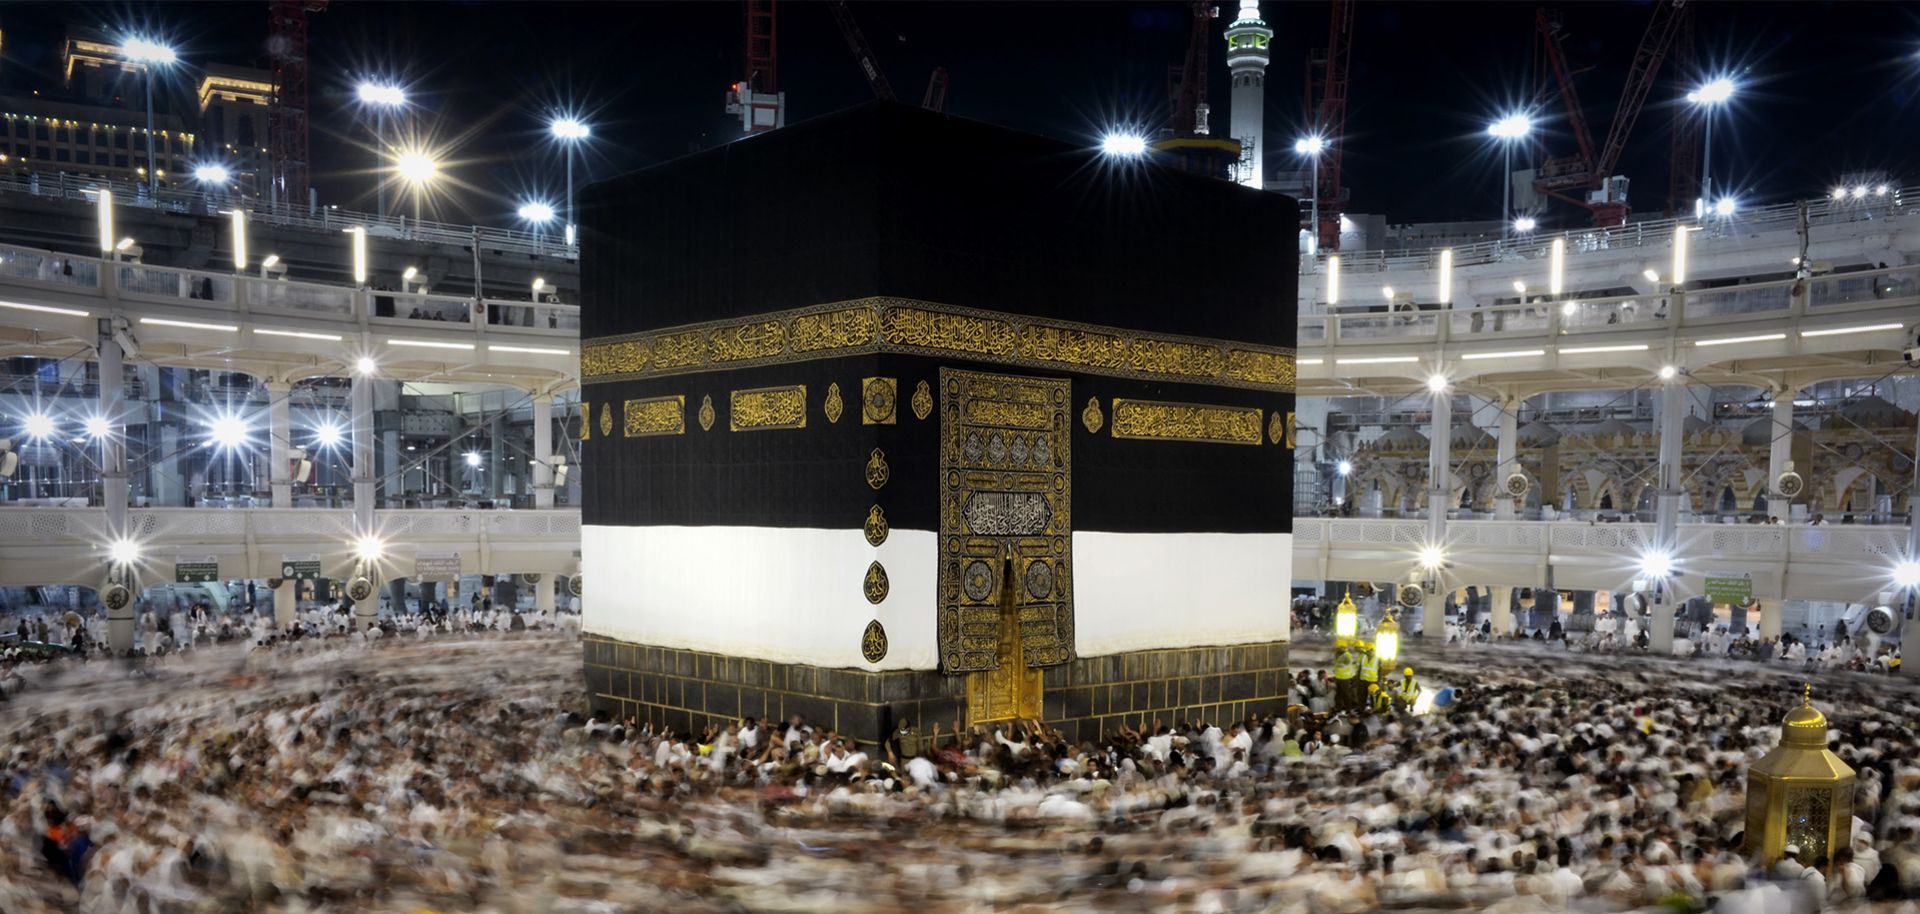 Muslim pilgrims circle counterclockwise Islam's holiest shrine, the Kaaba, at the Grand Mosque in the Saudi holy city of Mecca, late on September 21, 2015. The annual hajj pilgrimage begins on September 22, and more than a million faithful have already flocked to Saudi Arabia in preparation for what will for many be the highlight of their spiritual lives.